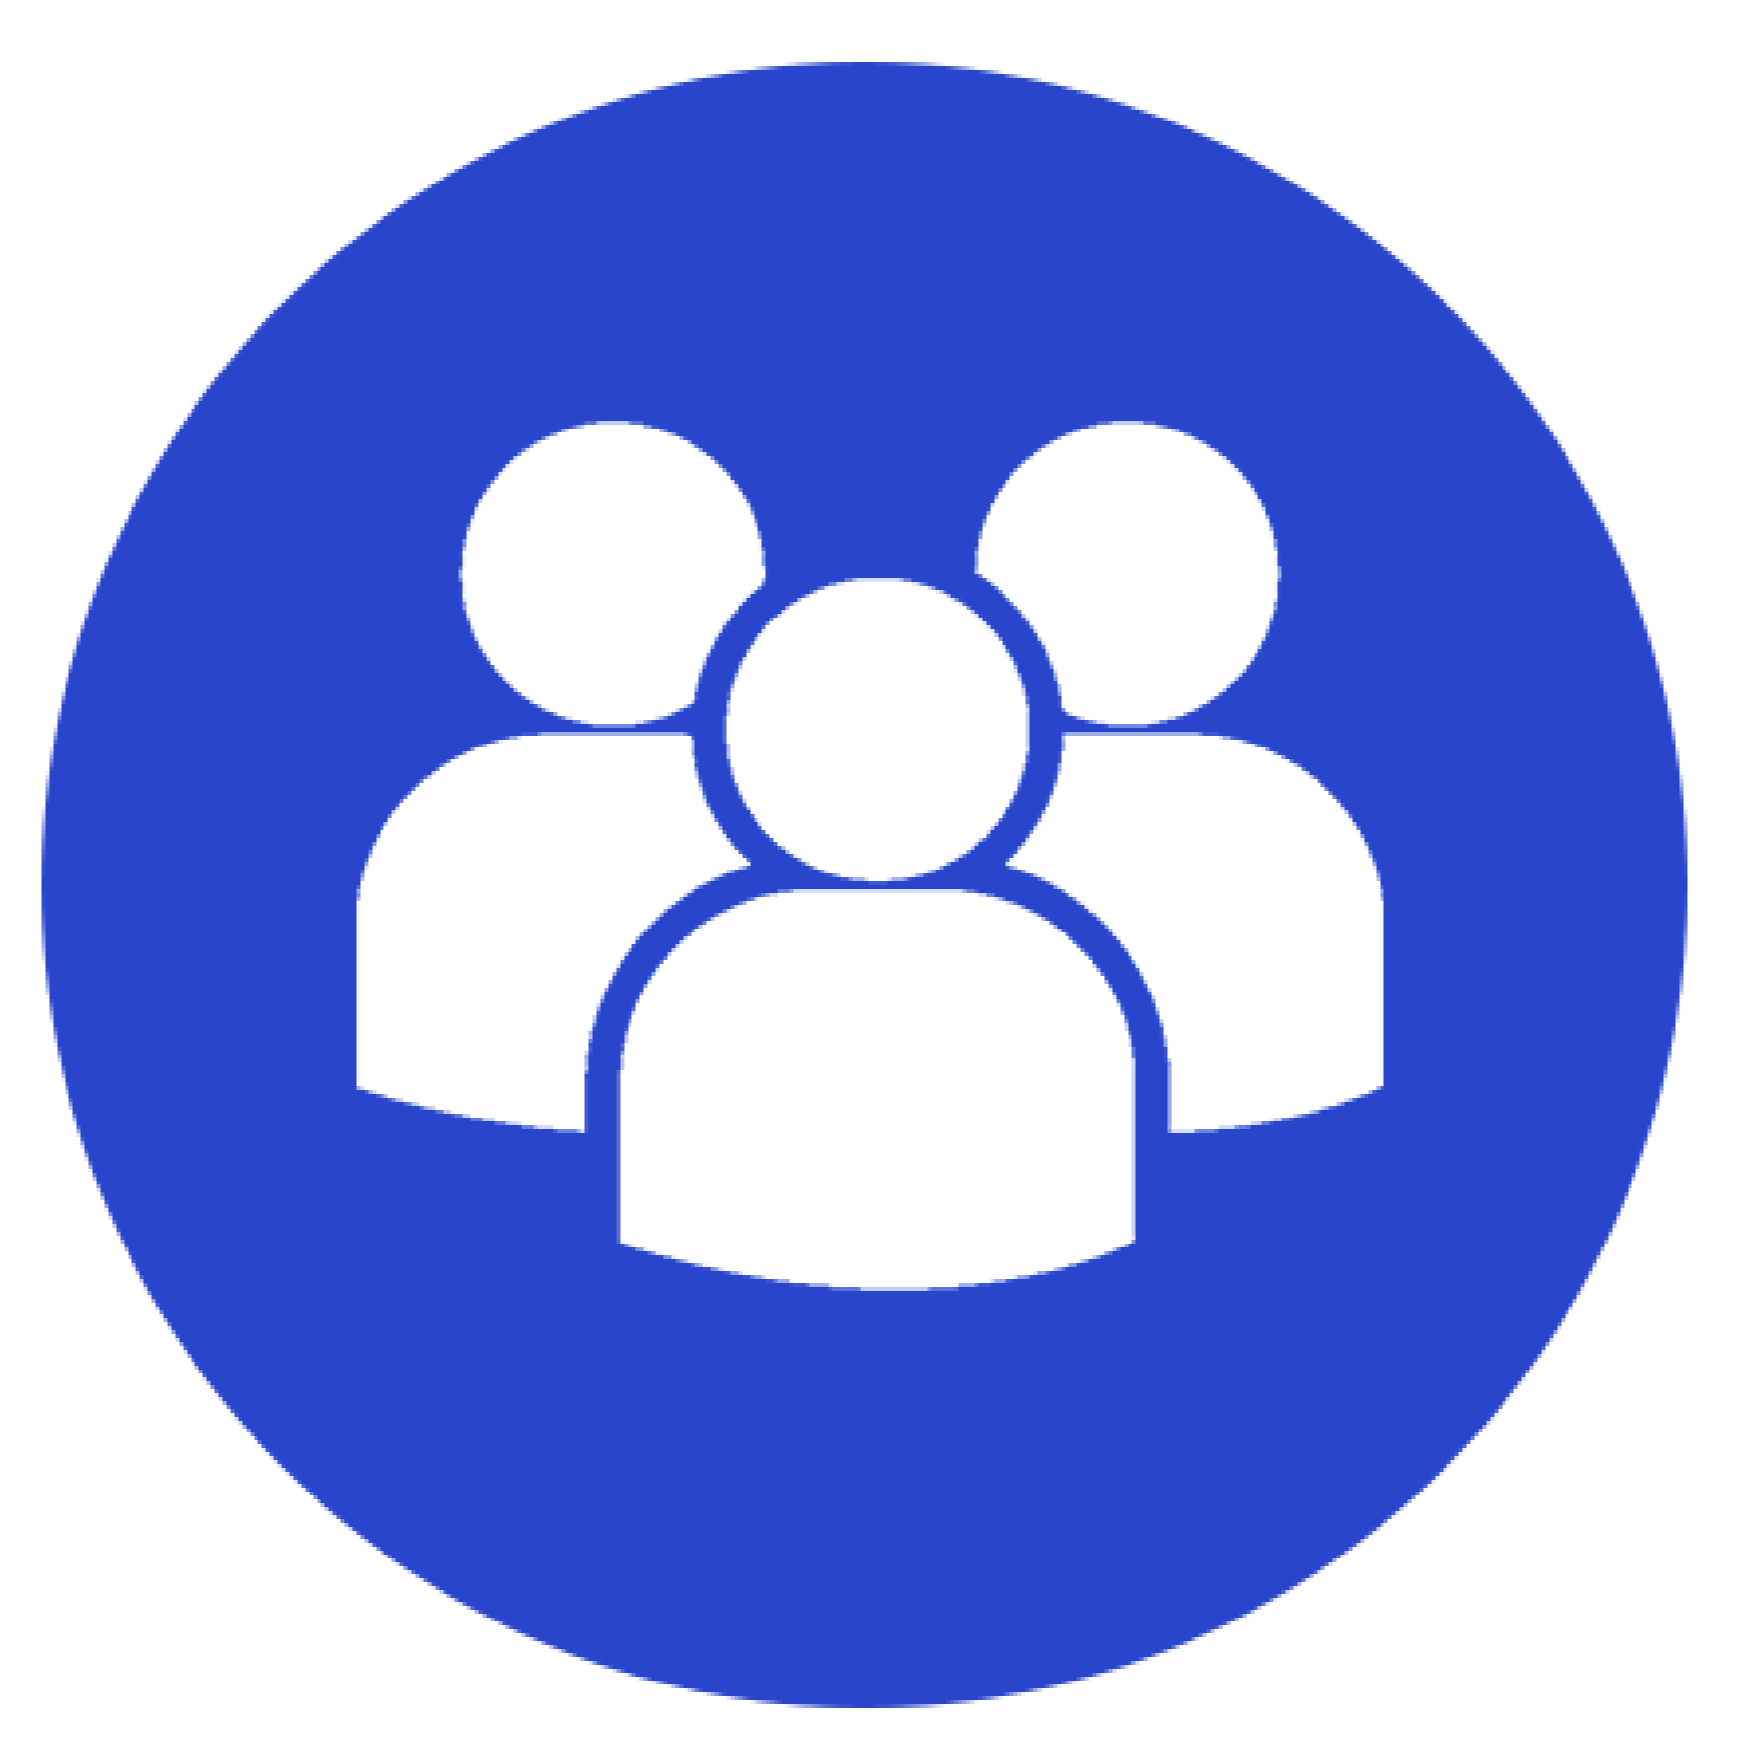 Goal 2: Employees graphic shows three avatars on a blue circle